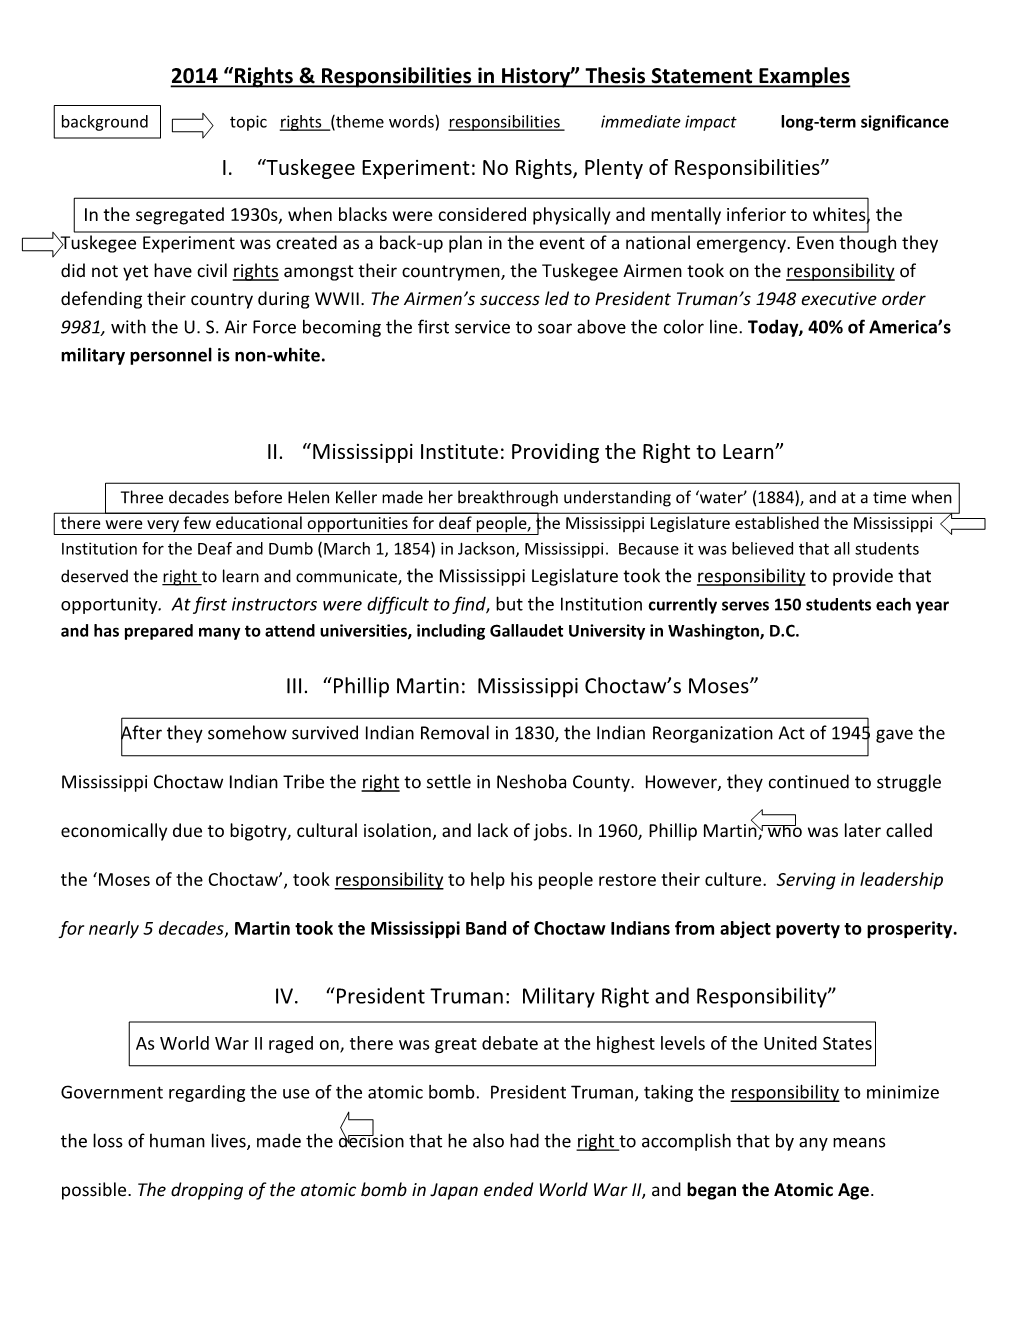 2014 “Rights & Responsibilities in History” Thesis Statement Examples I. “Tuskegee Experiment: No Rights, Plenty of Re